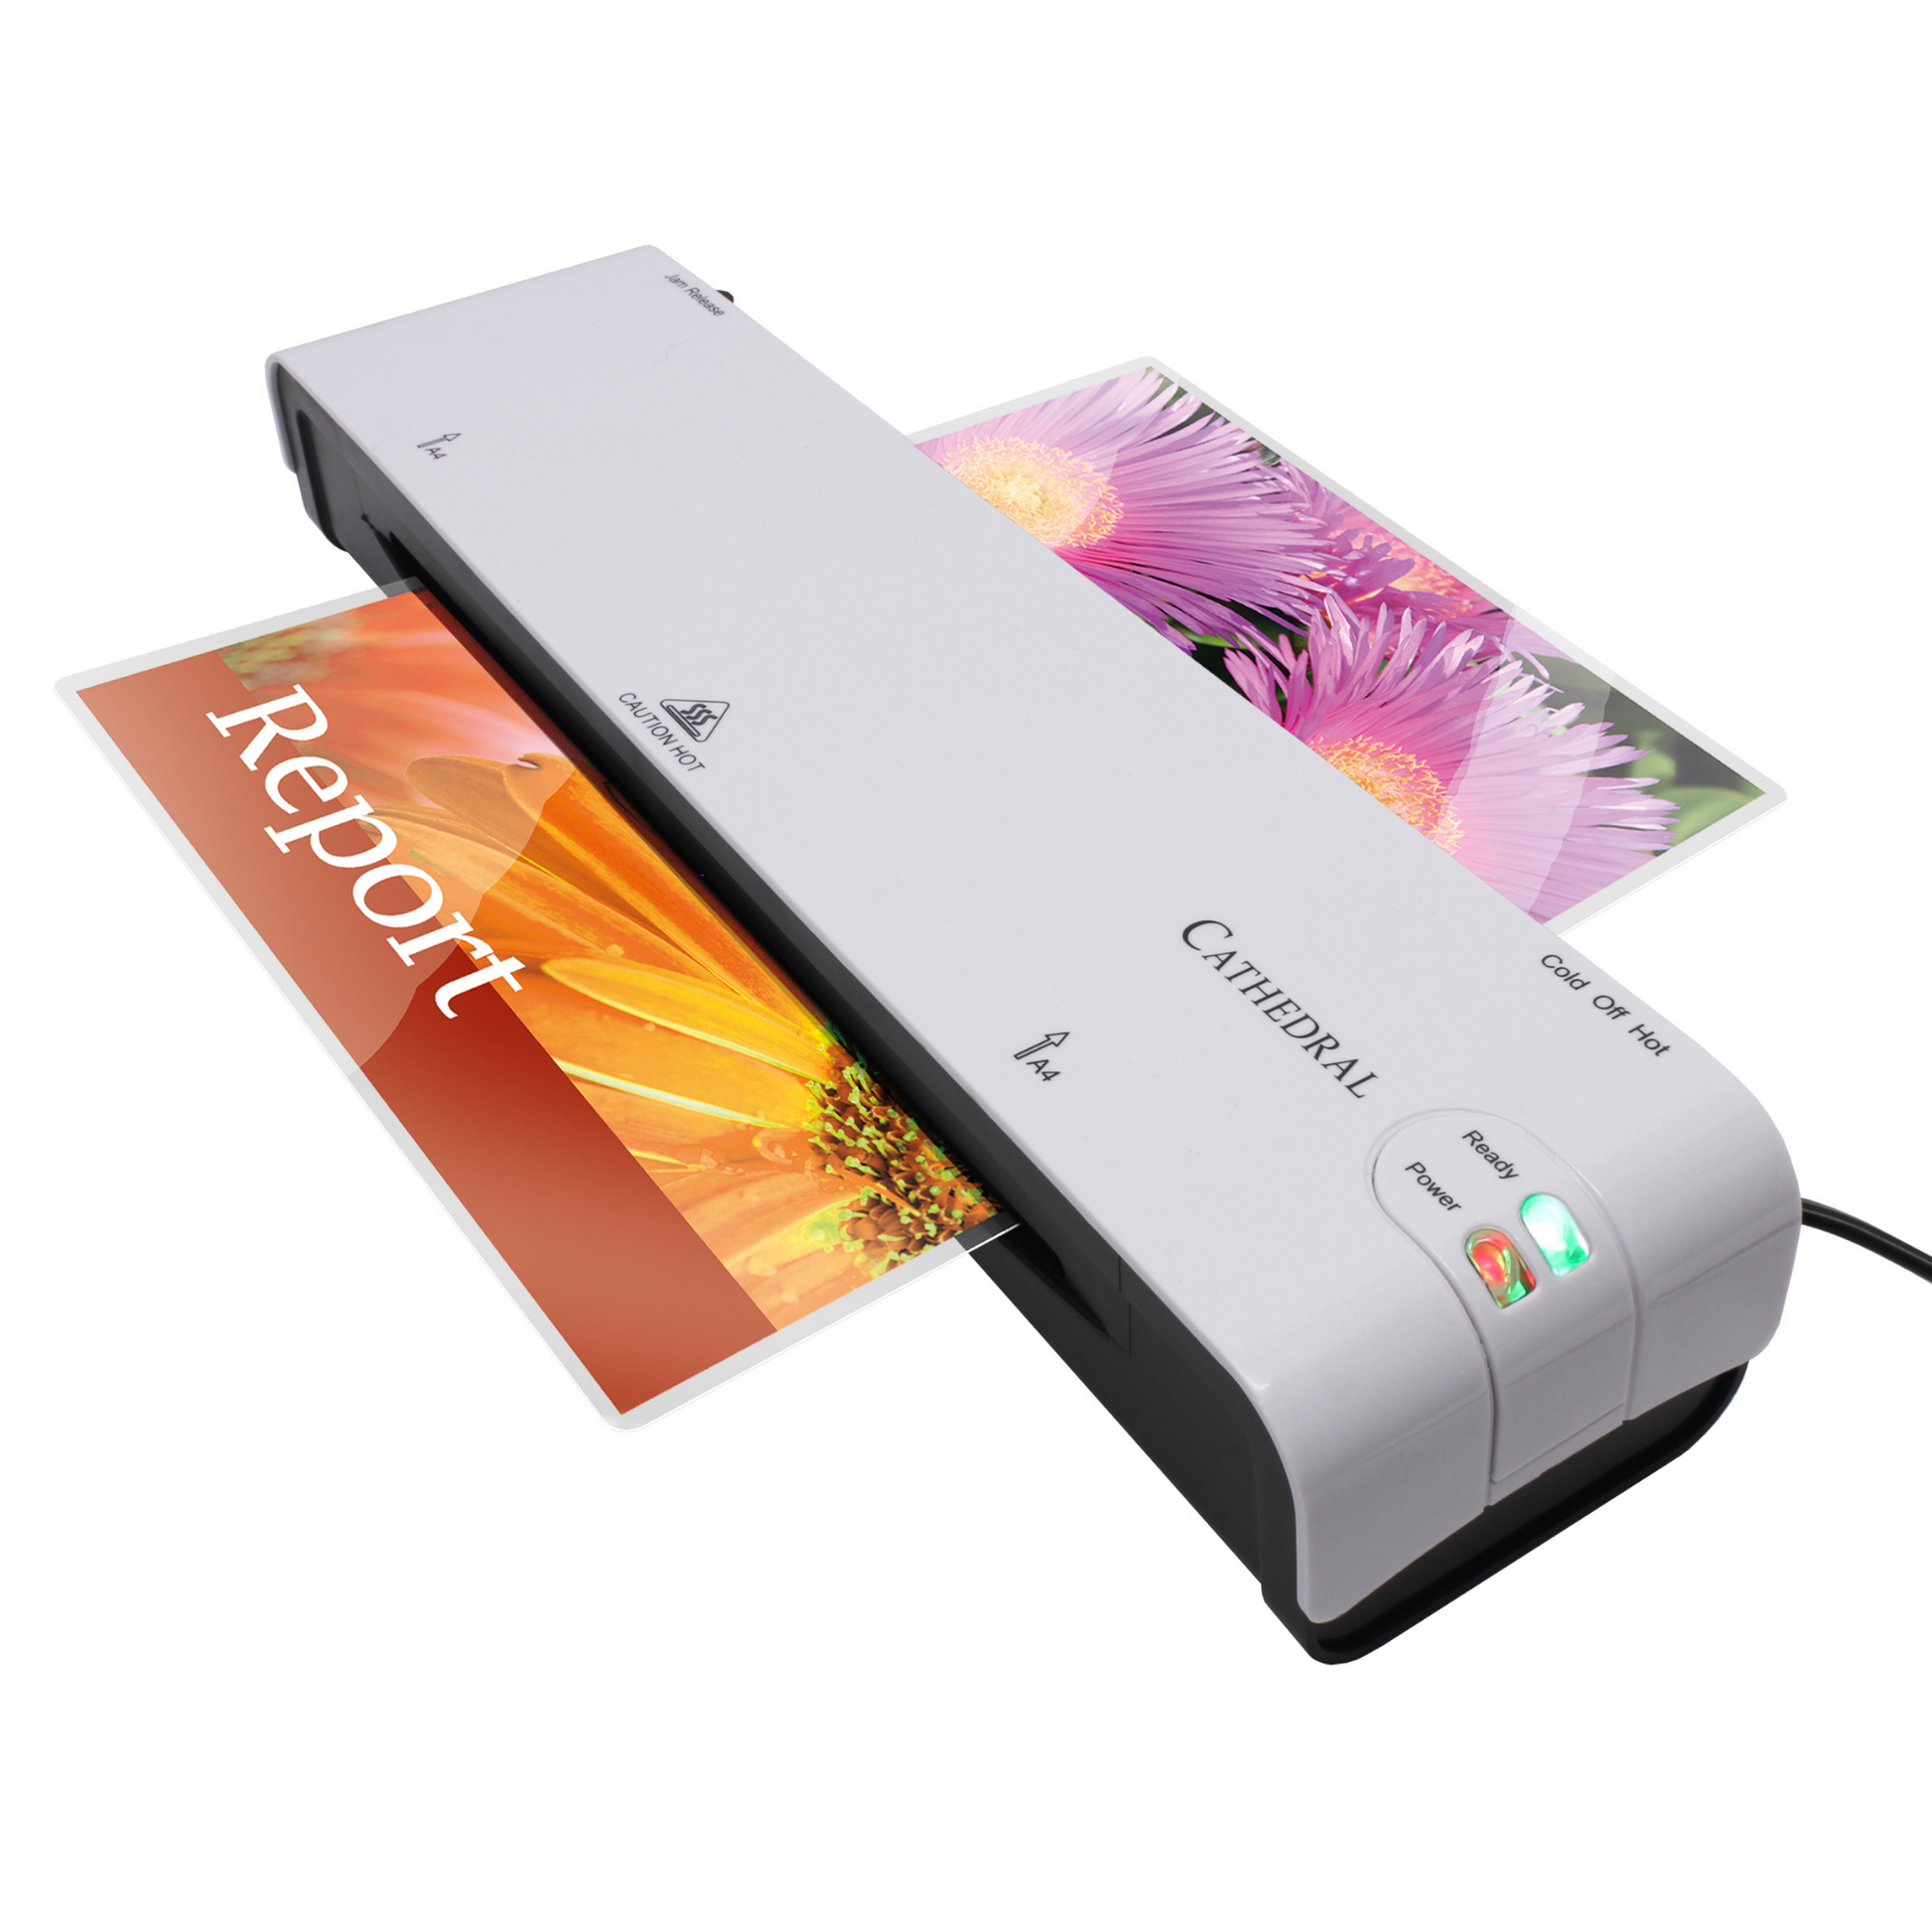 Image showing white Cathedral Products A4 laminator in use, while laminating an A4 sheet with "Report" and purple flowers on it.